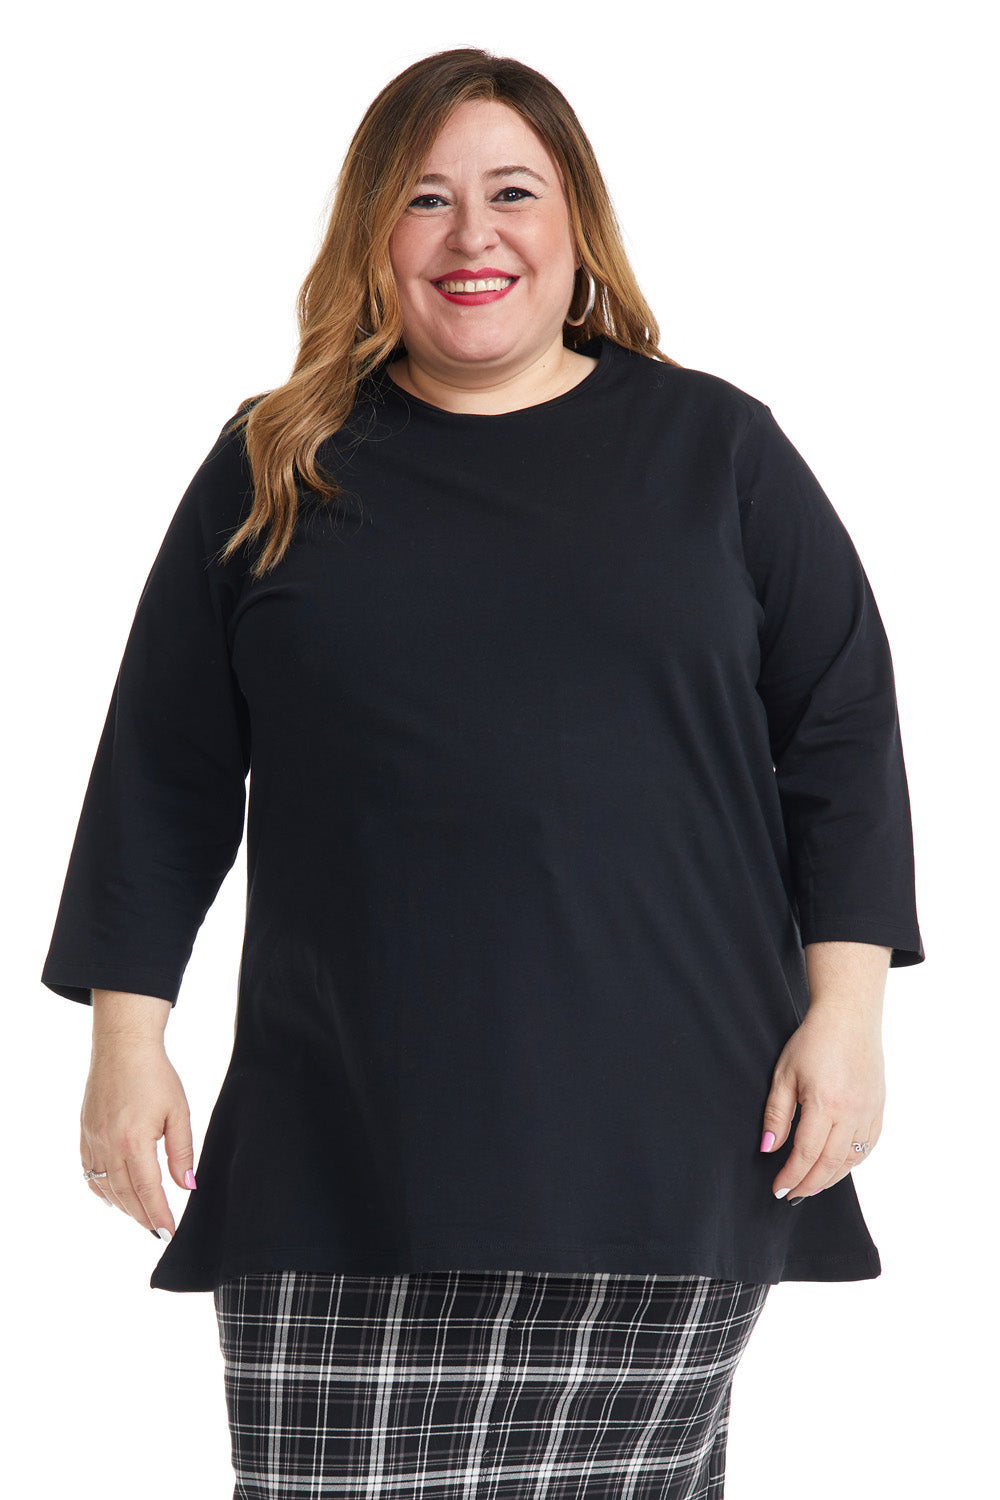 Black oversized loose comfortable tee for plus size women